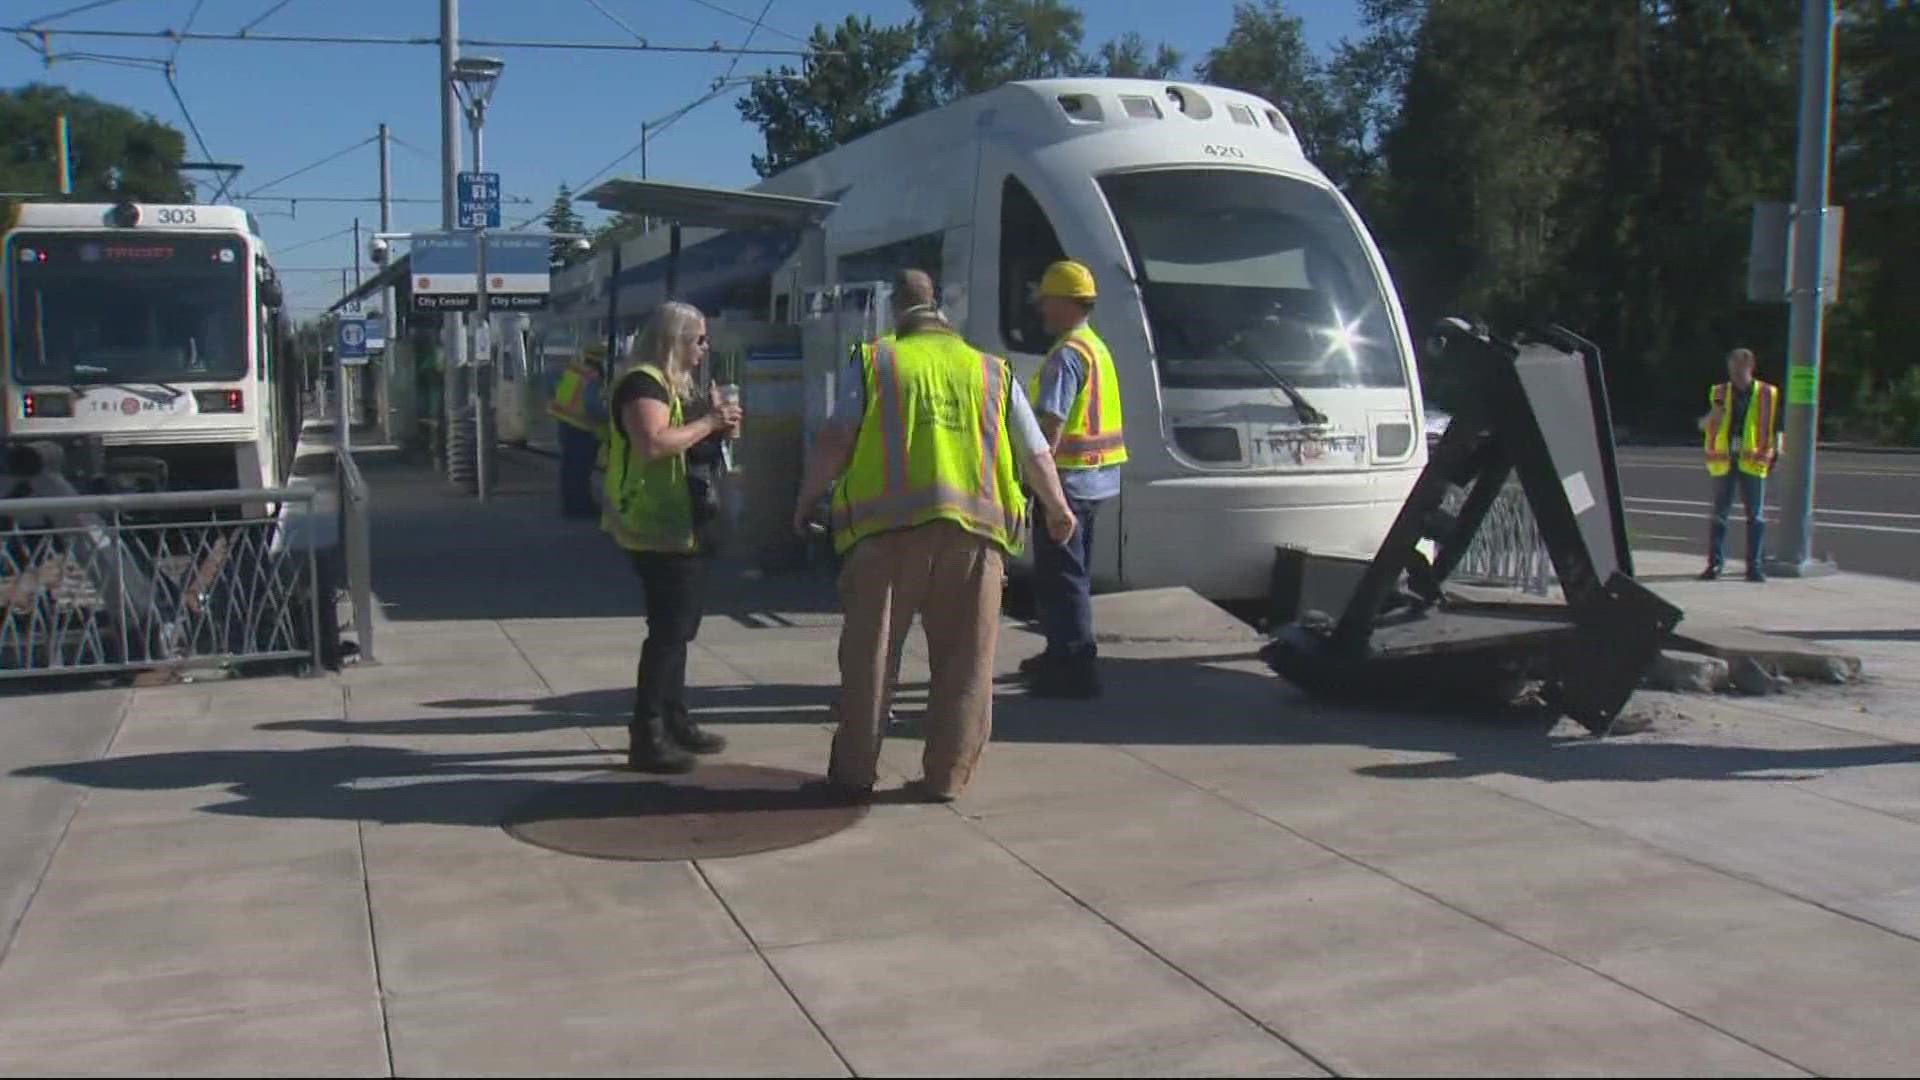 The operator of the train was taken to the hospital. Two passengers were evaluated for minor injuries at the scene.